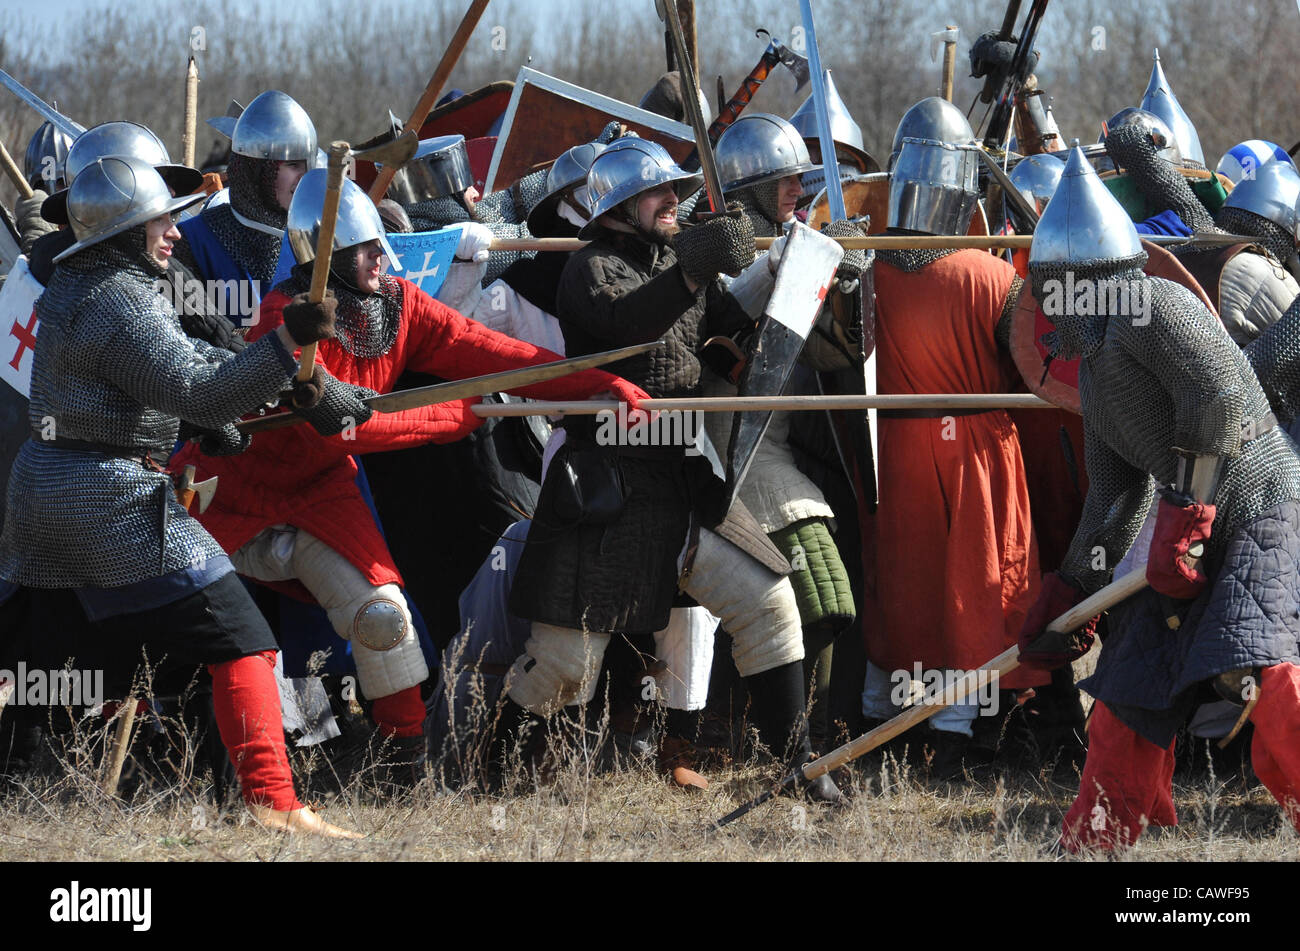 April 22, 2012 - Russia - Pskov region of Russia.Pictured:Historical reconstruction of the The Battle of the Ice (also known as the Battle of Lake Peipus) to mark 770 anniversary of the Battle...The Battle of Lake Peipus was a battle between the Republic of Novgorod and the Livonian branch of the Te Stock Photo